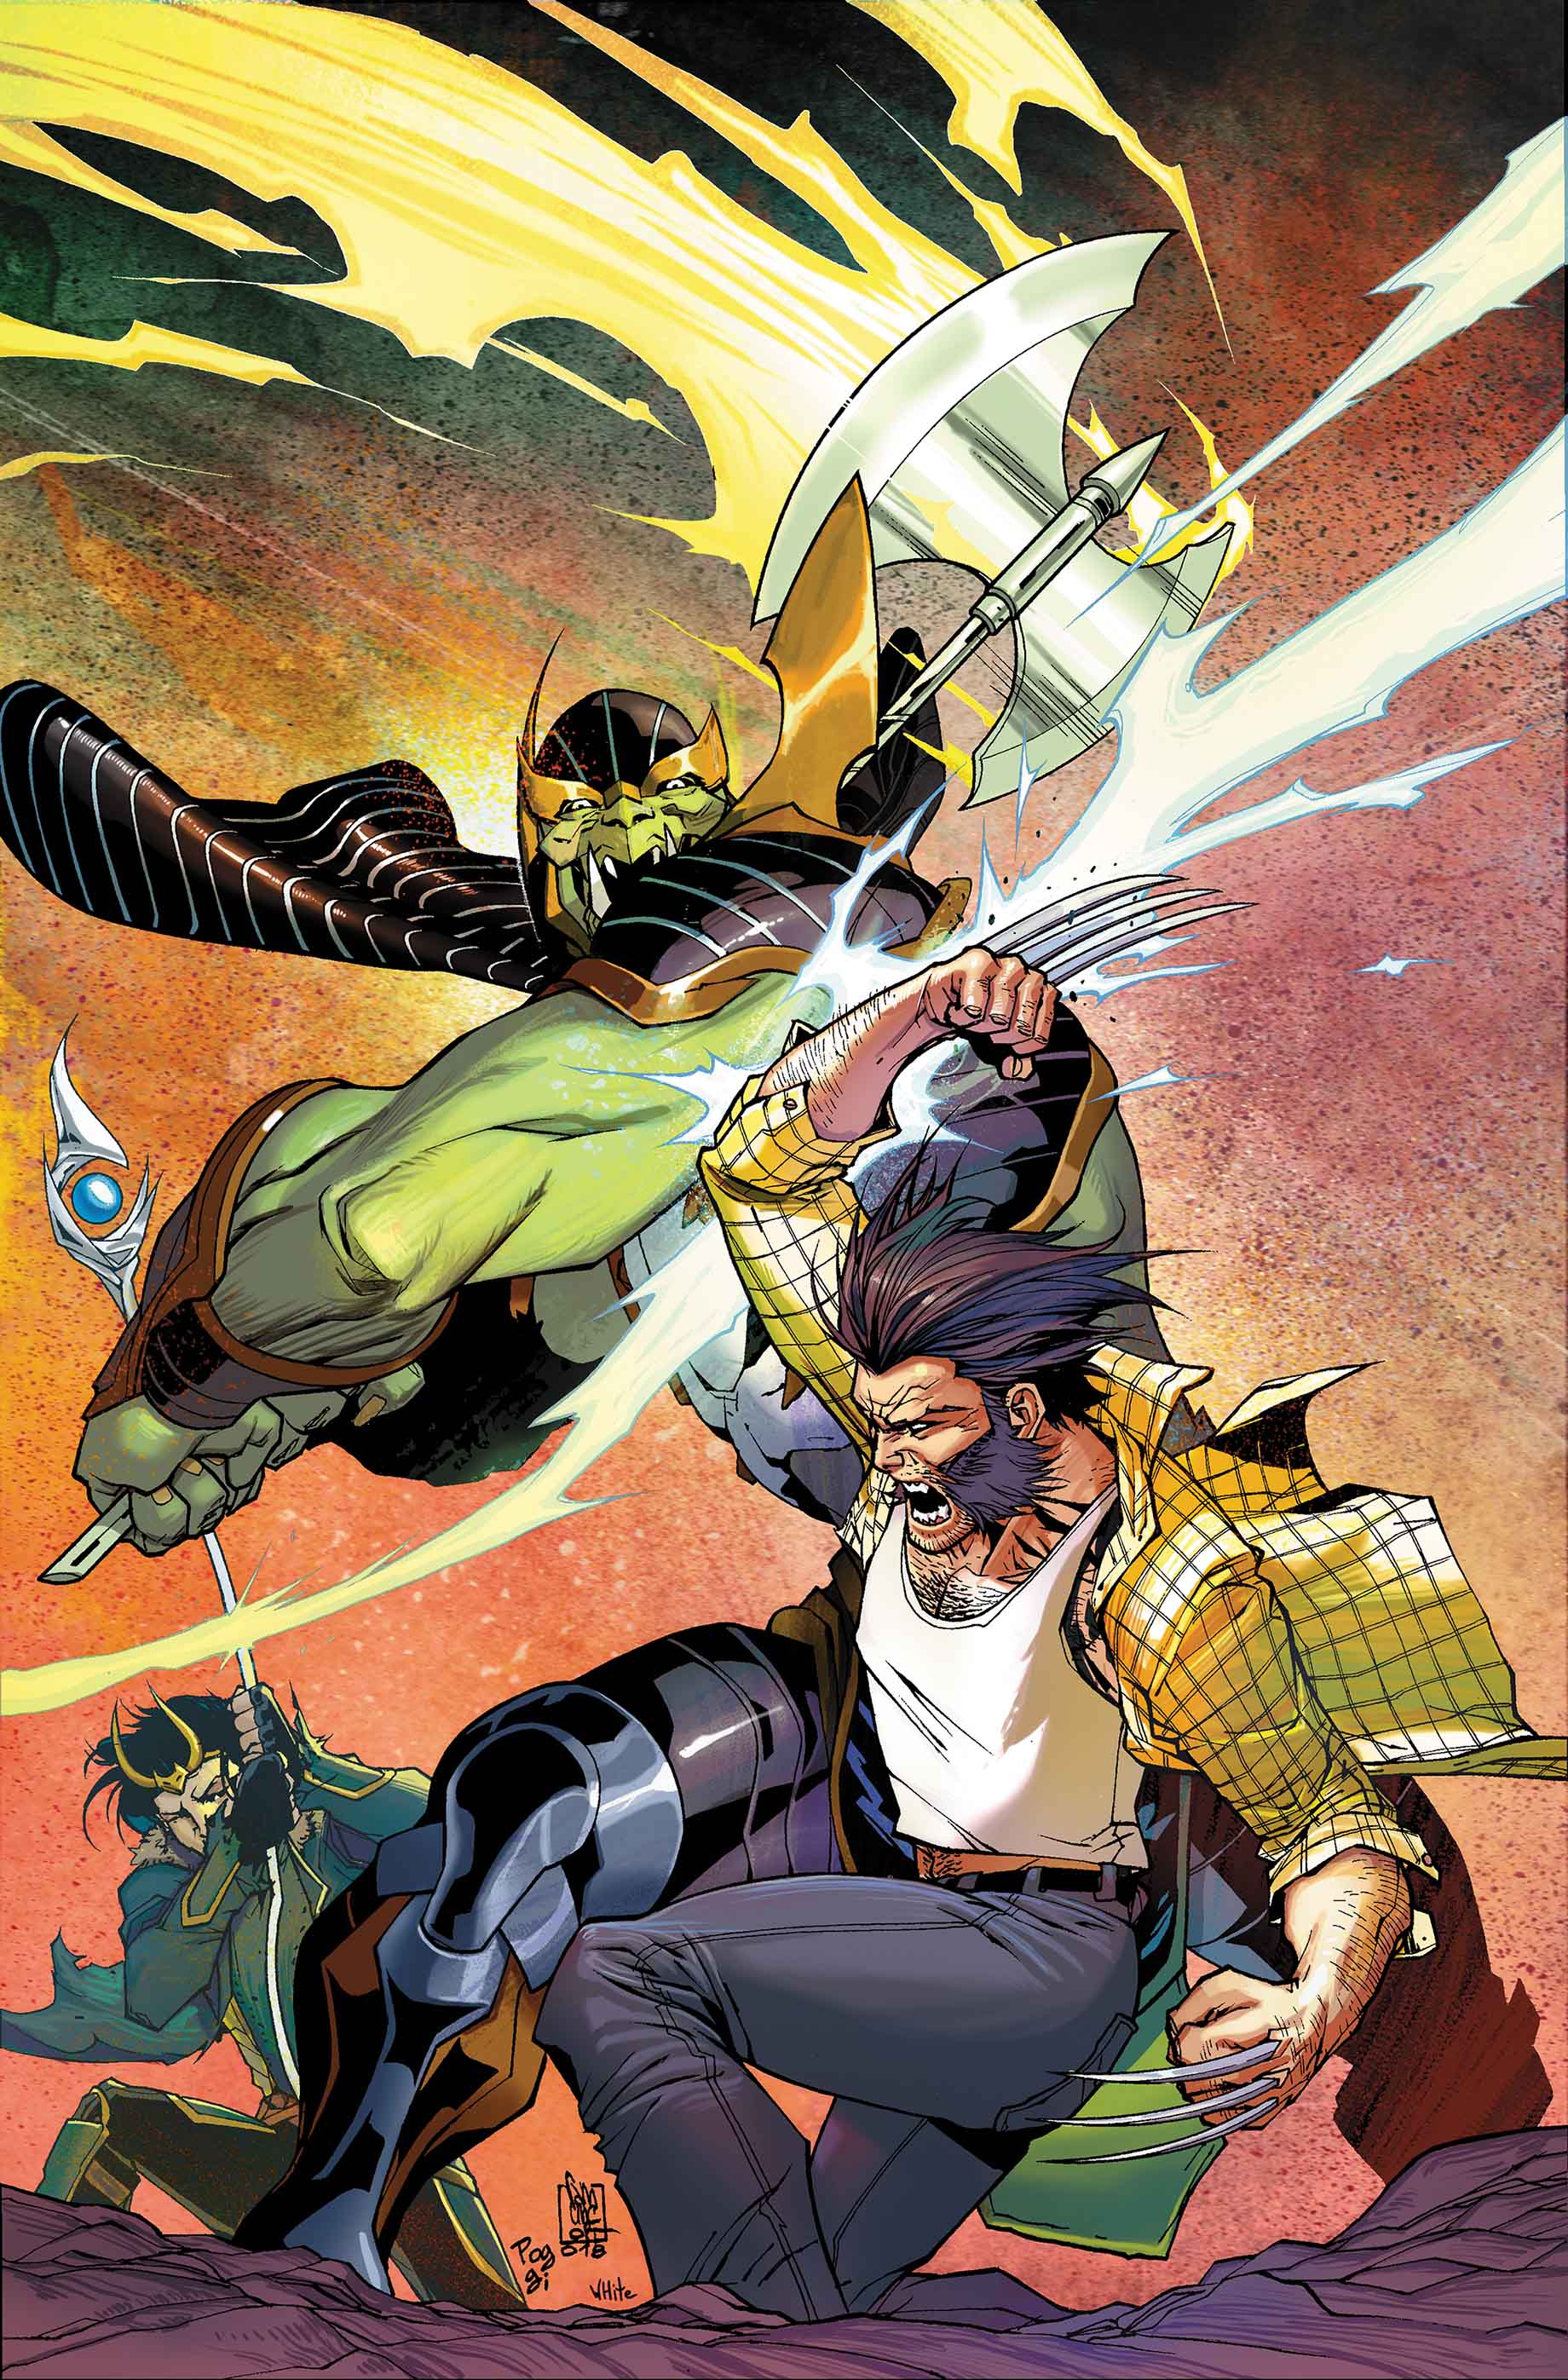 WOLVERINE: INFINITY WATCH #2 (of 5)